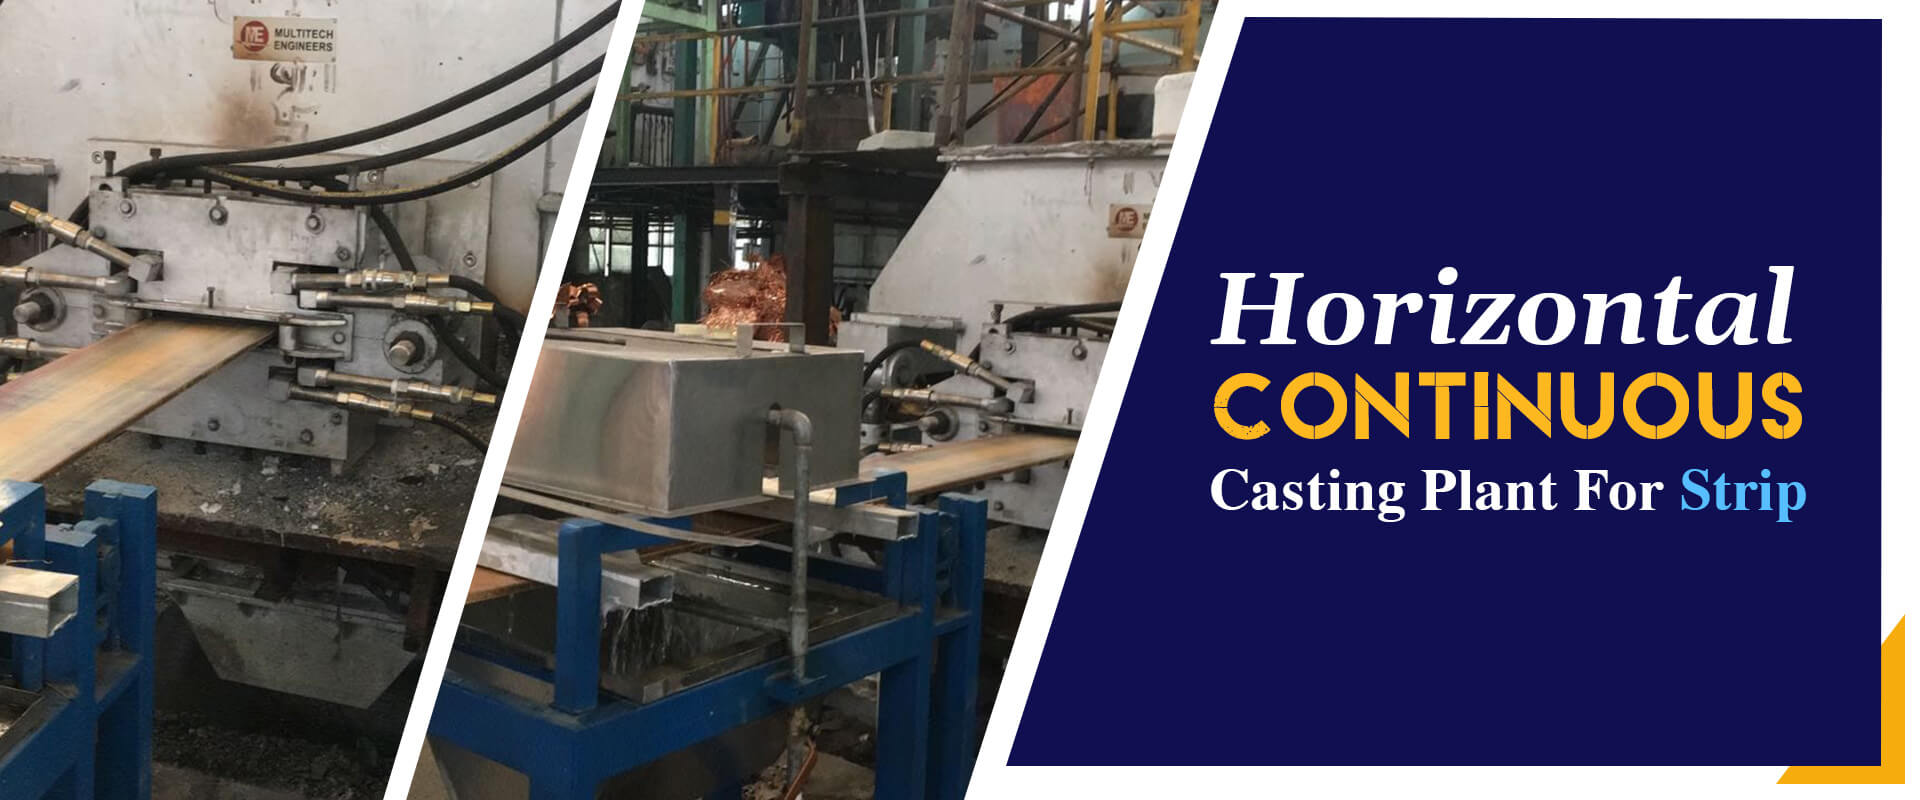 Horizontal Continuous Casting Plant For Strip